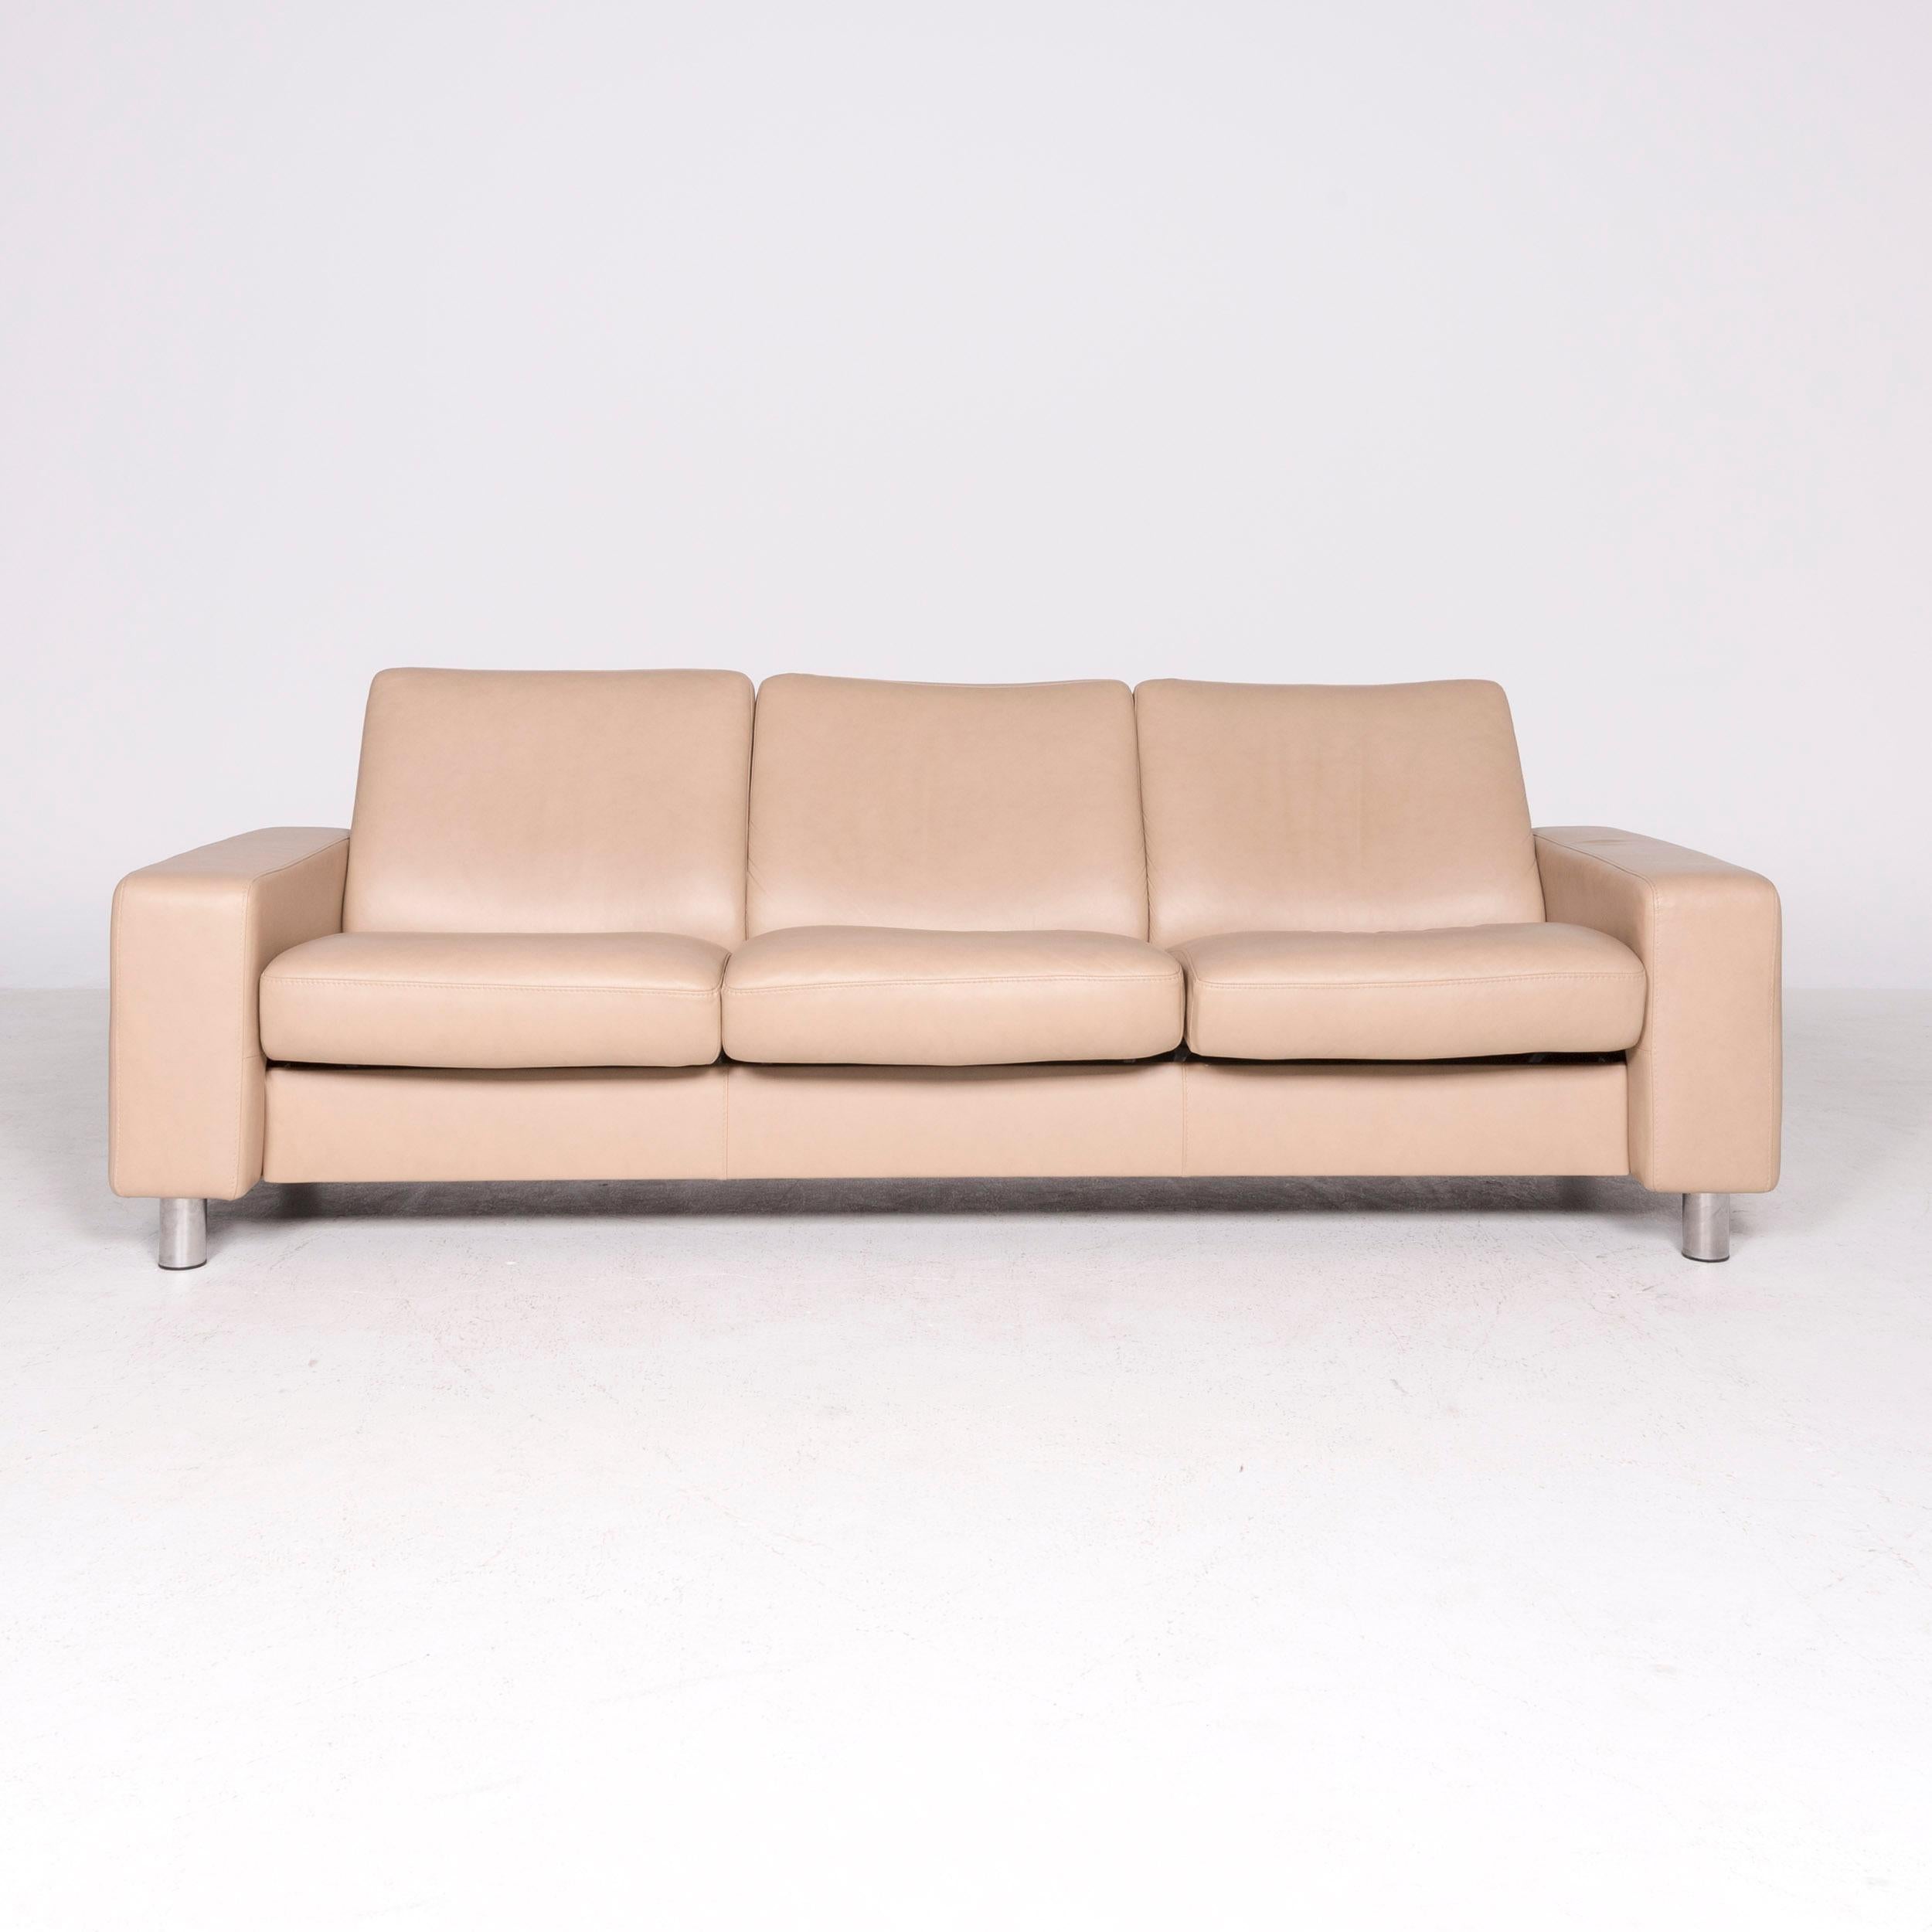 Modern Stressless Designer Leather Sofa Beige Genuine Leather Three-Seat Couch For Sale